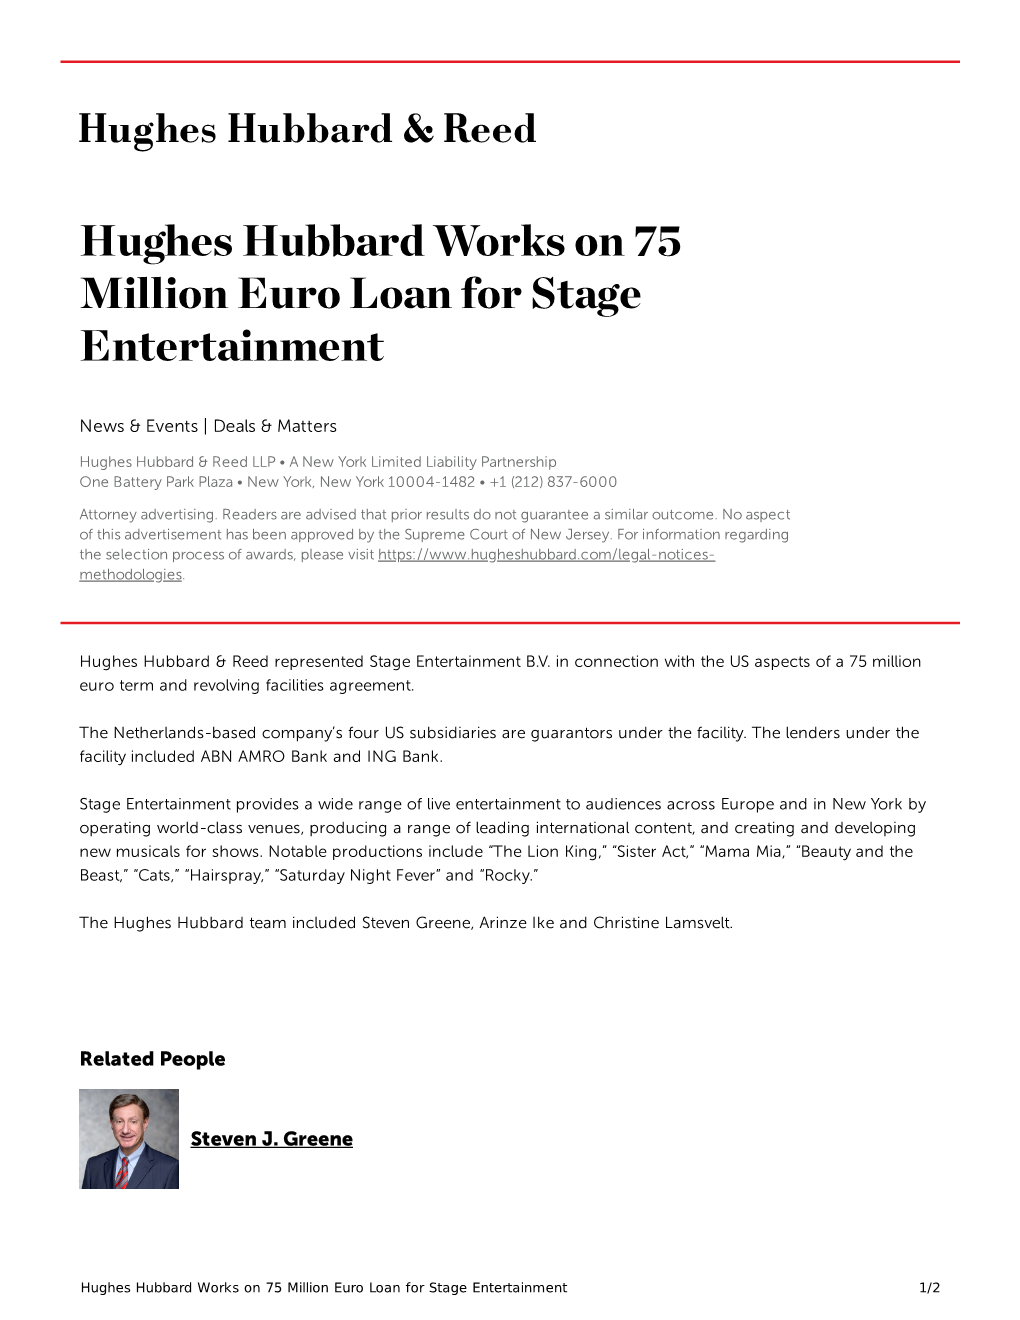 Hughes Hubbard Works on 75 Million Euro Loan for Stage Entertainment